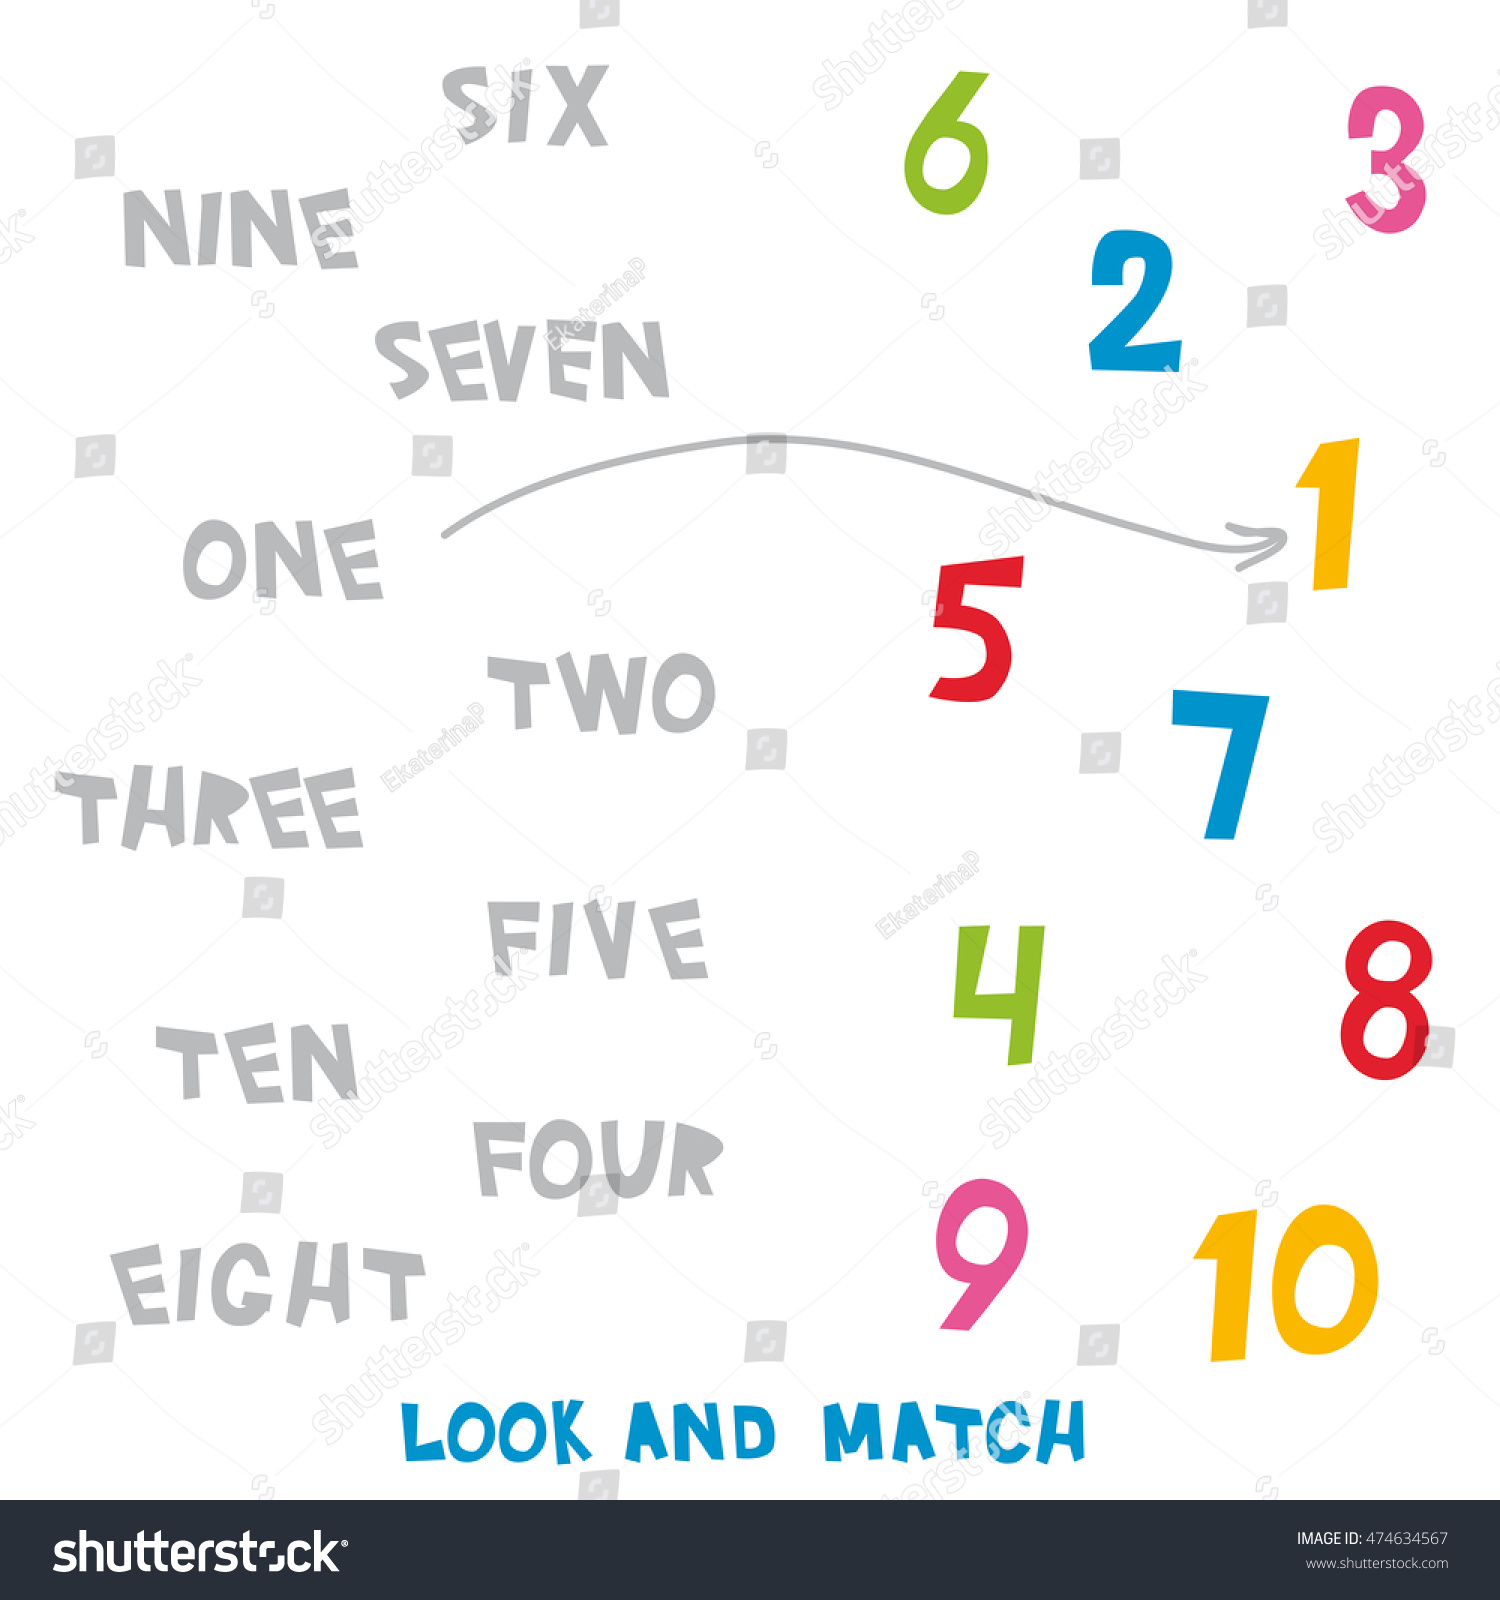 look match numbers 1 10 kids stock vector royalty free 474634567 shutterstock